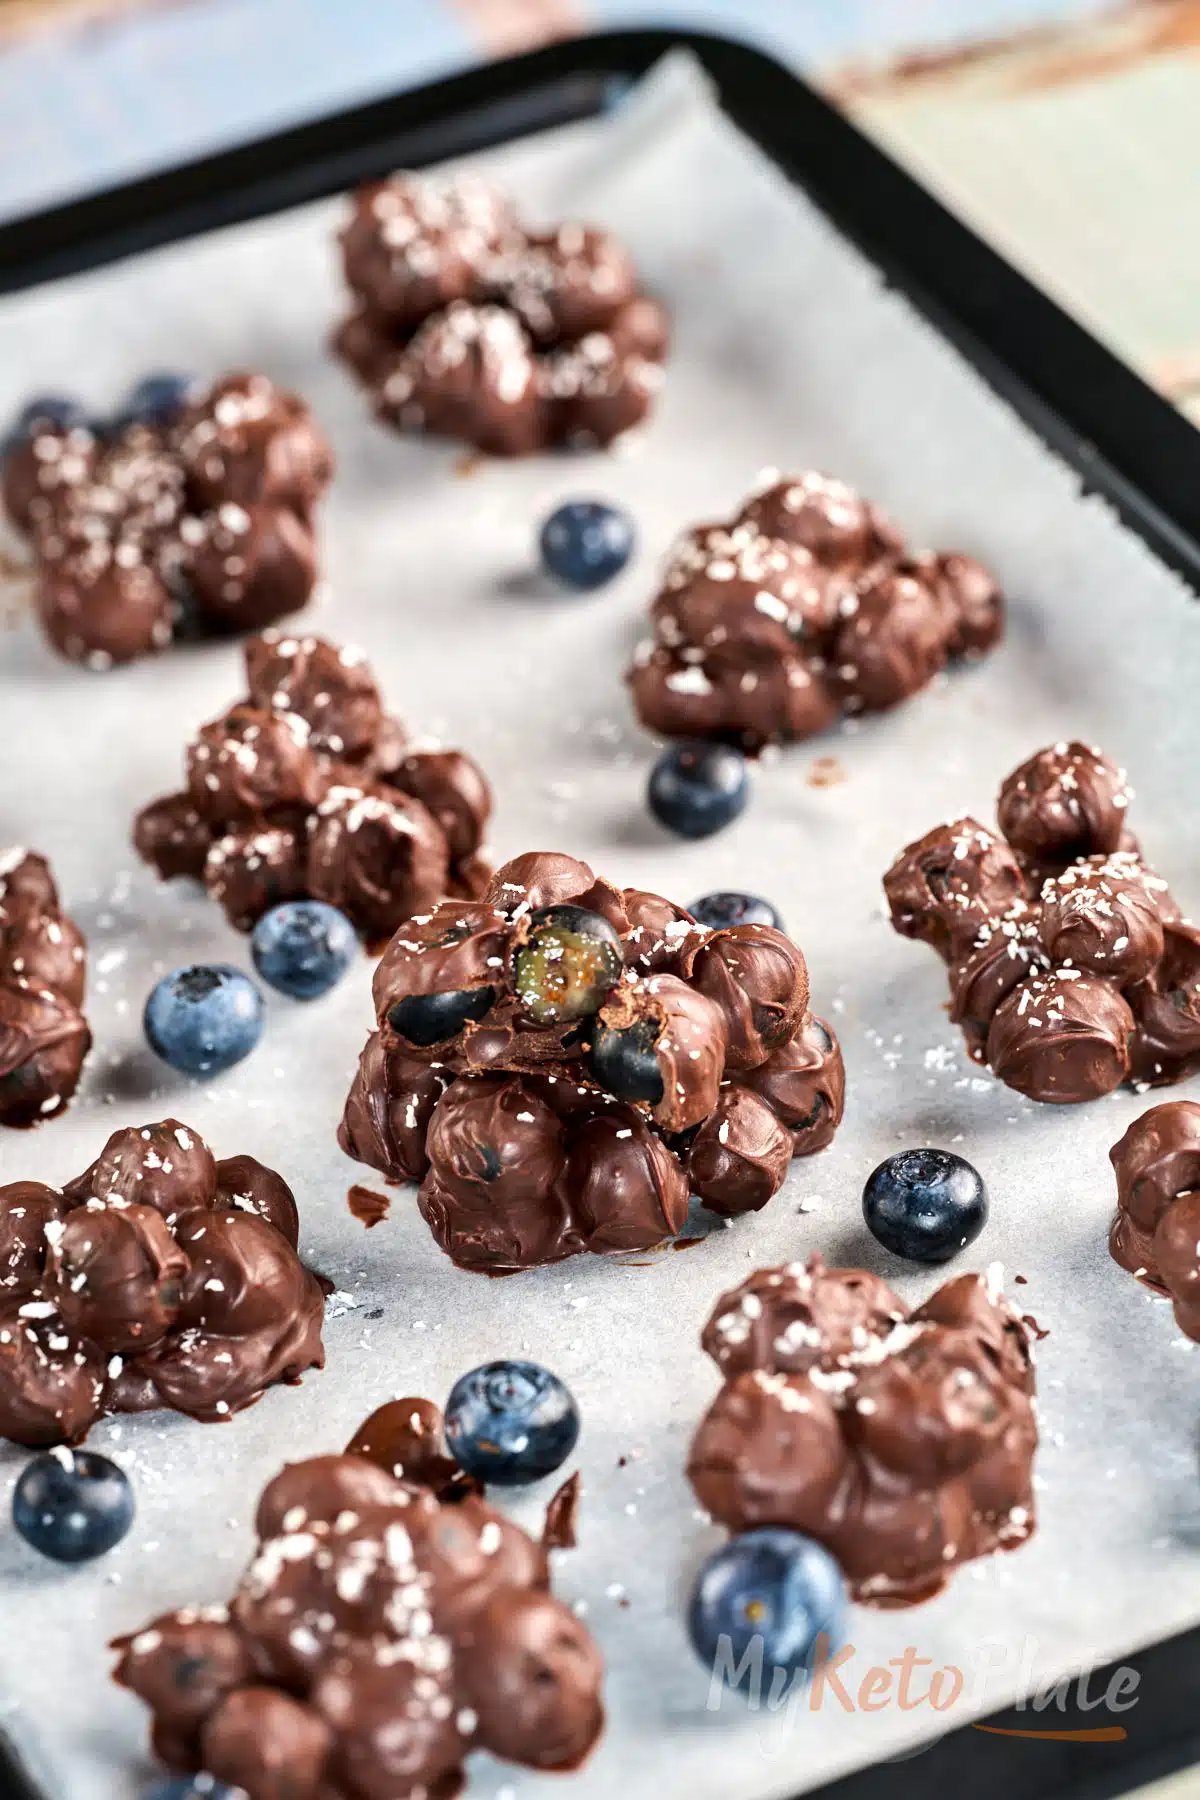 Chocolate-Covered Blueberries